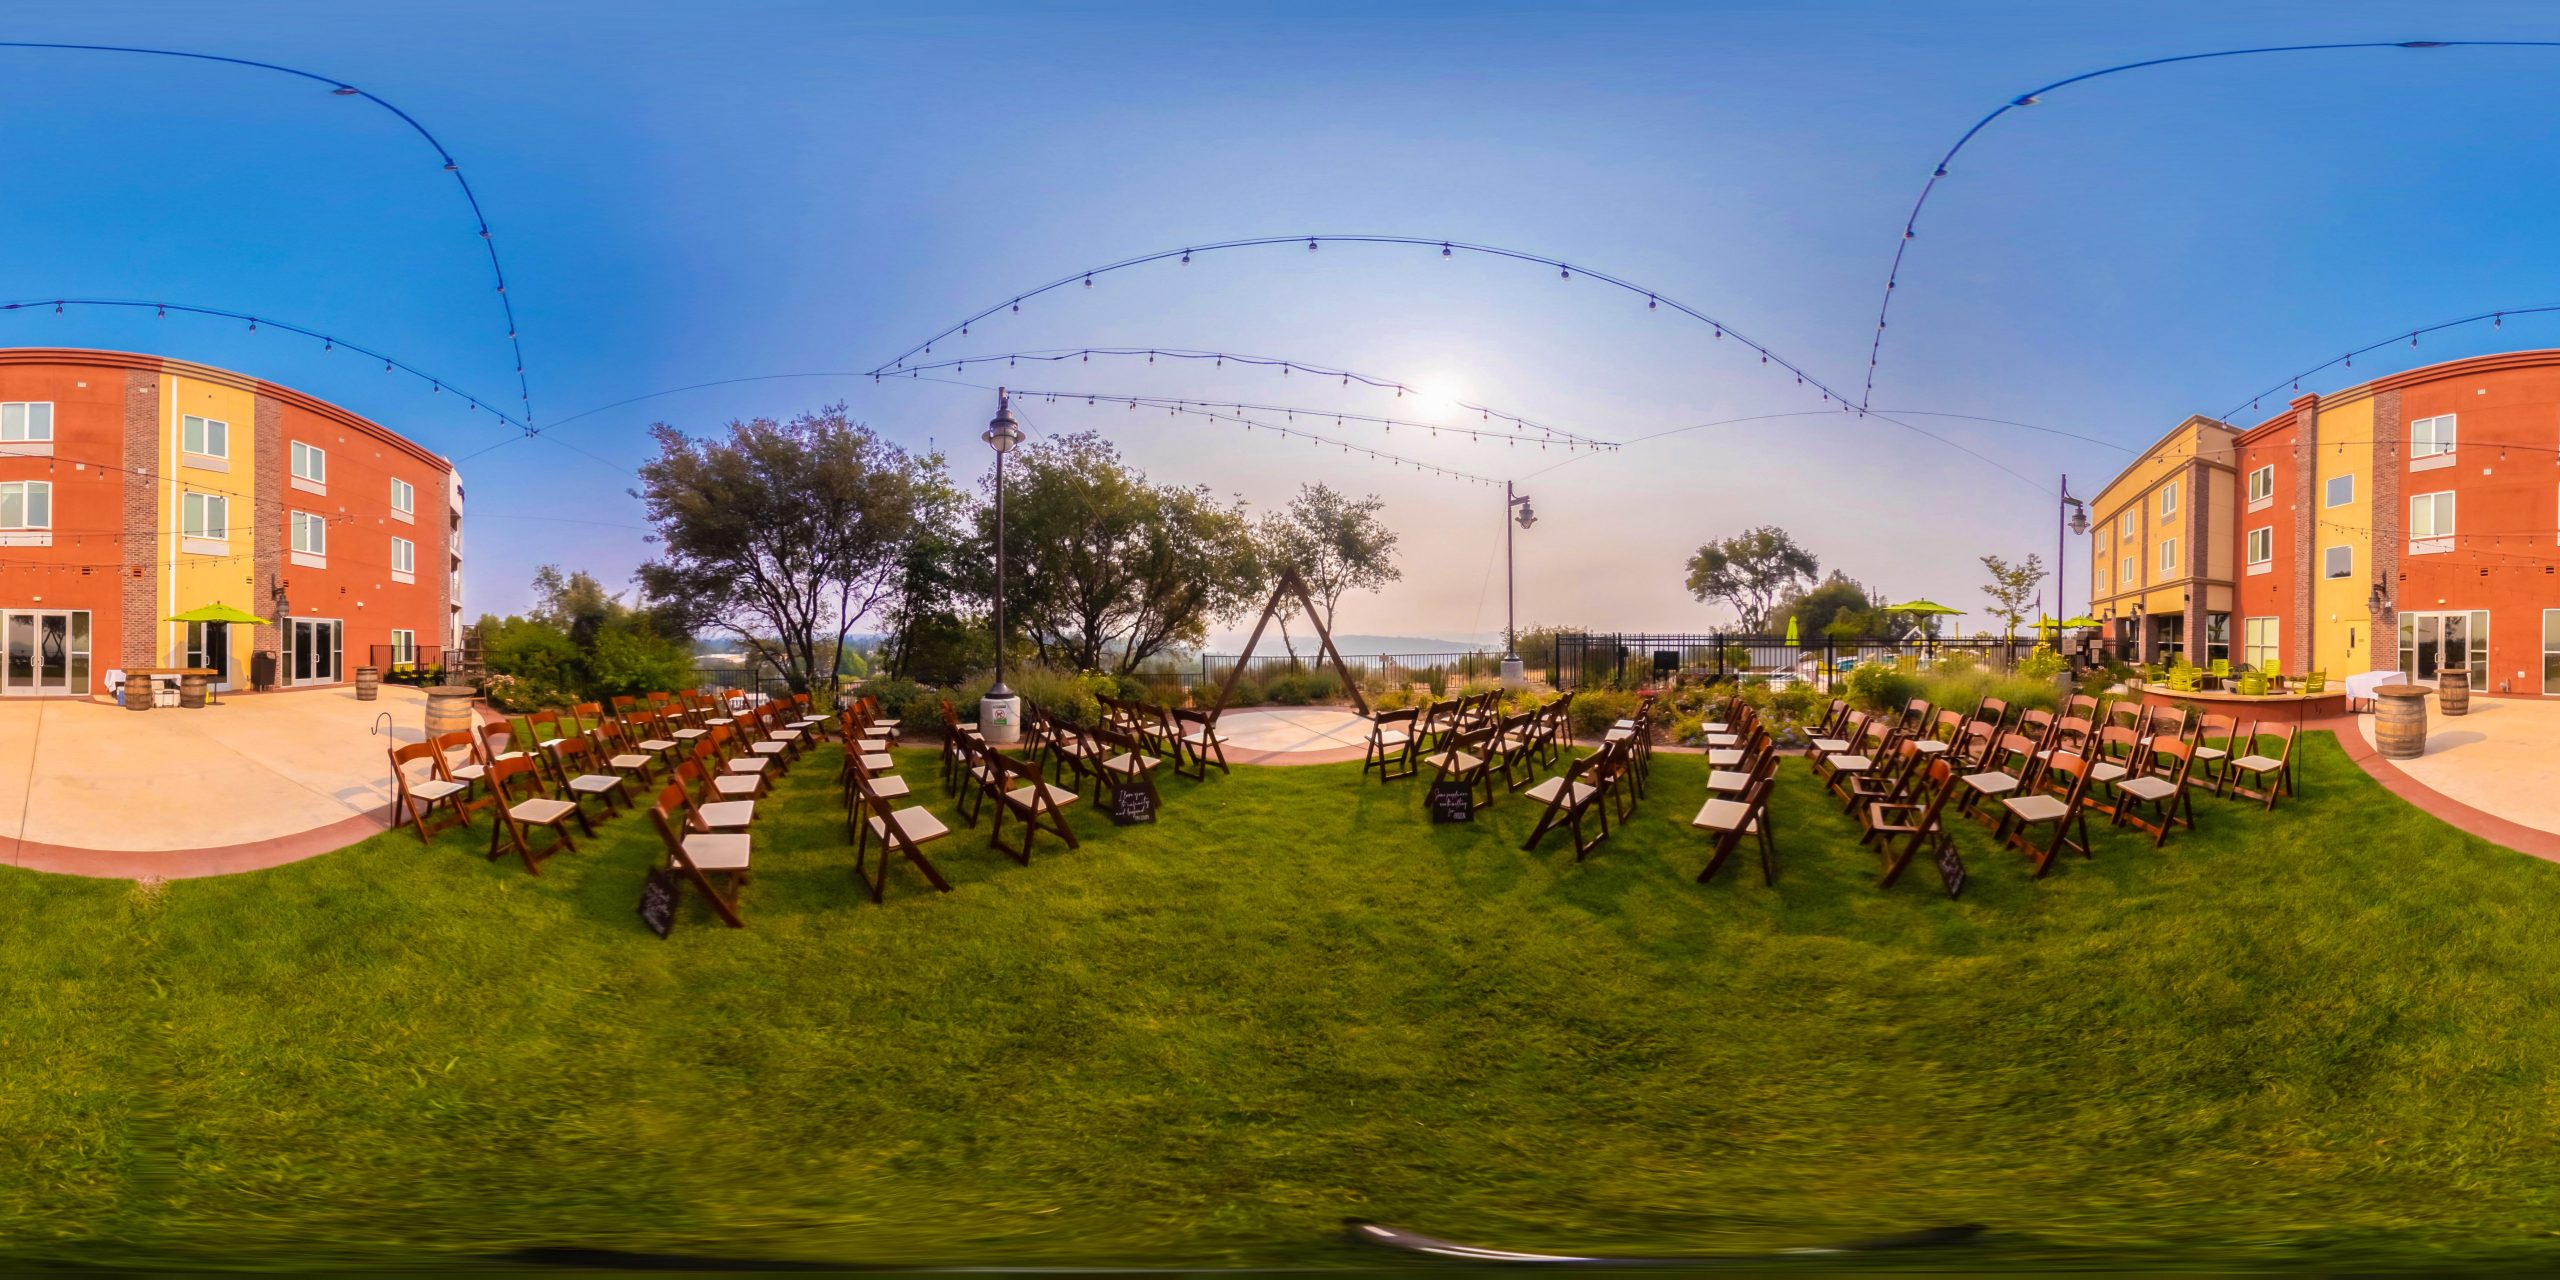 Chairs are lined outside on a green grass.